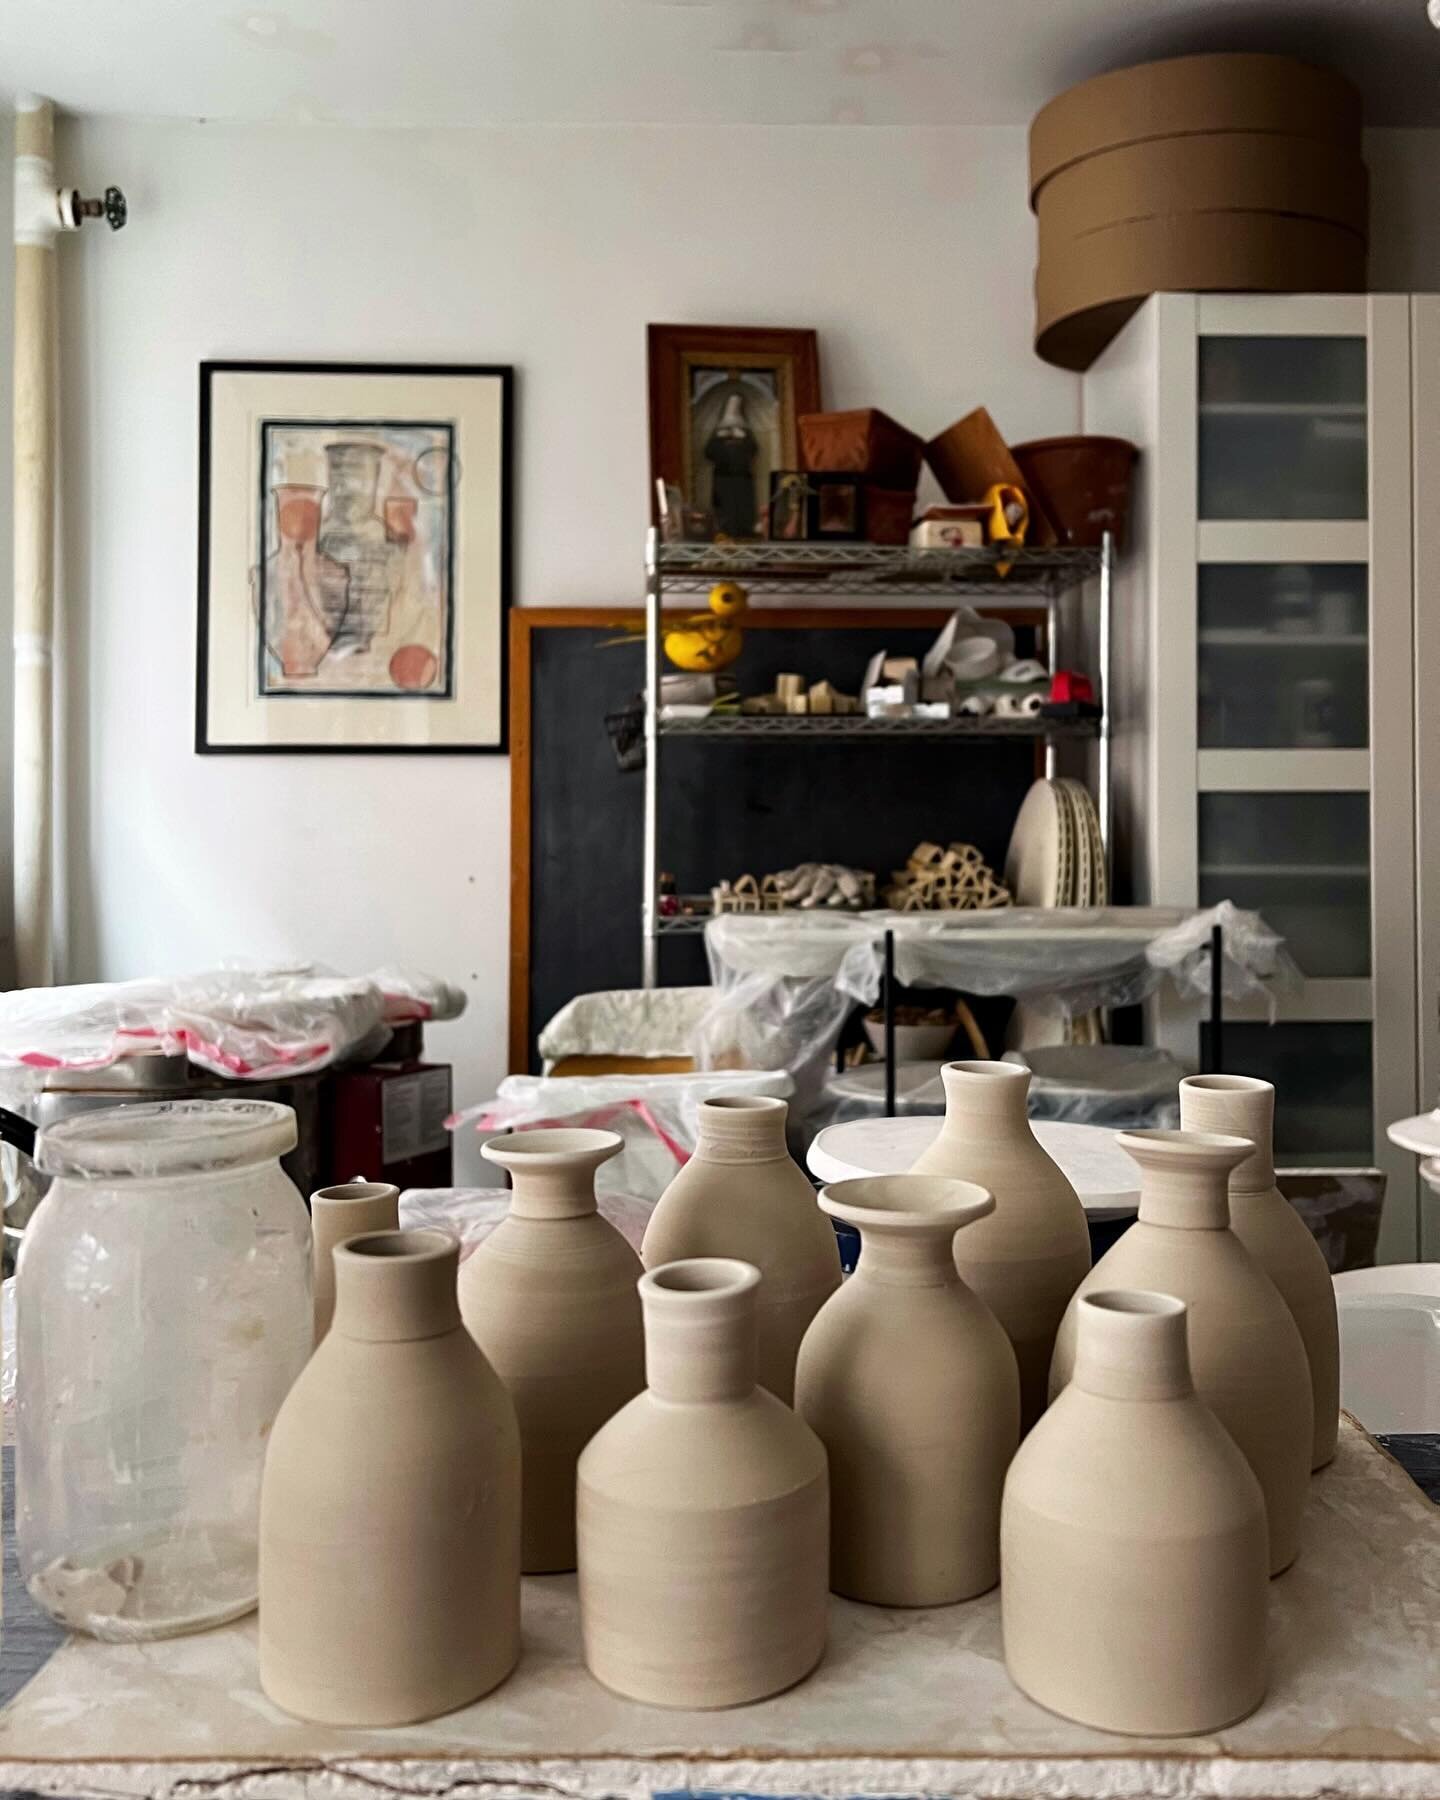 Zipping through a week of wet clay here. 

A little selection of bud vases freshly trimmed. The idea of spring always makes me want to make bud vases (Spring feels very much theoretical here&mdash;howling winds and grey days 😏🪻)

I used a vintage j